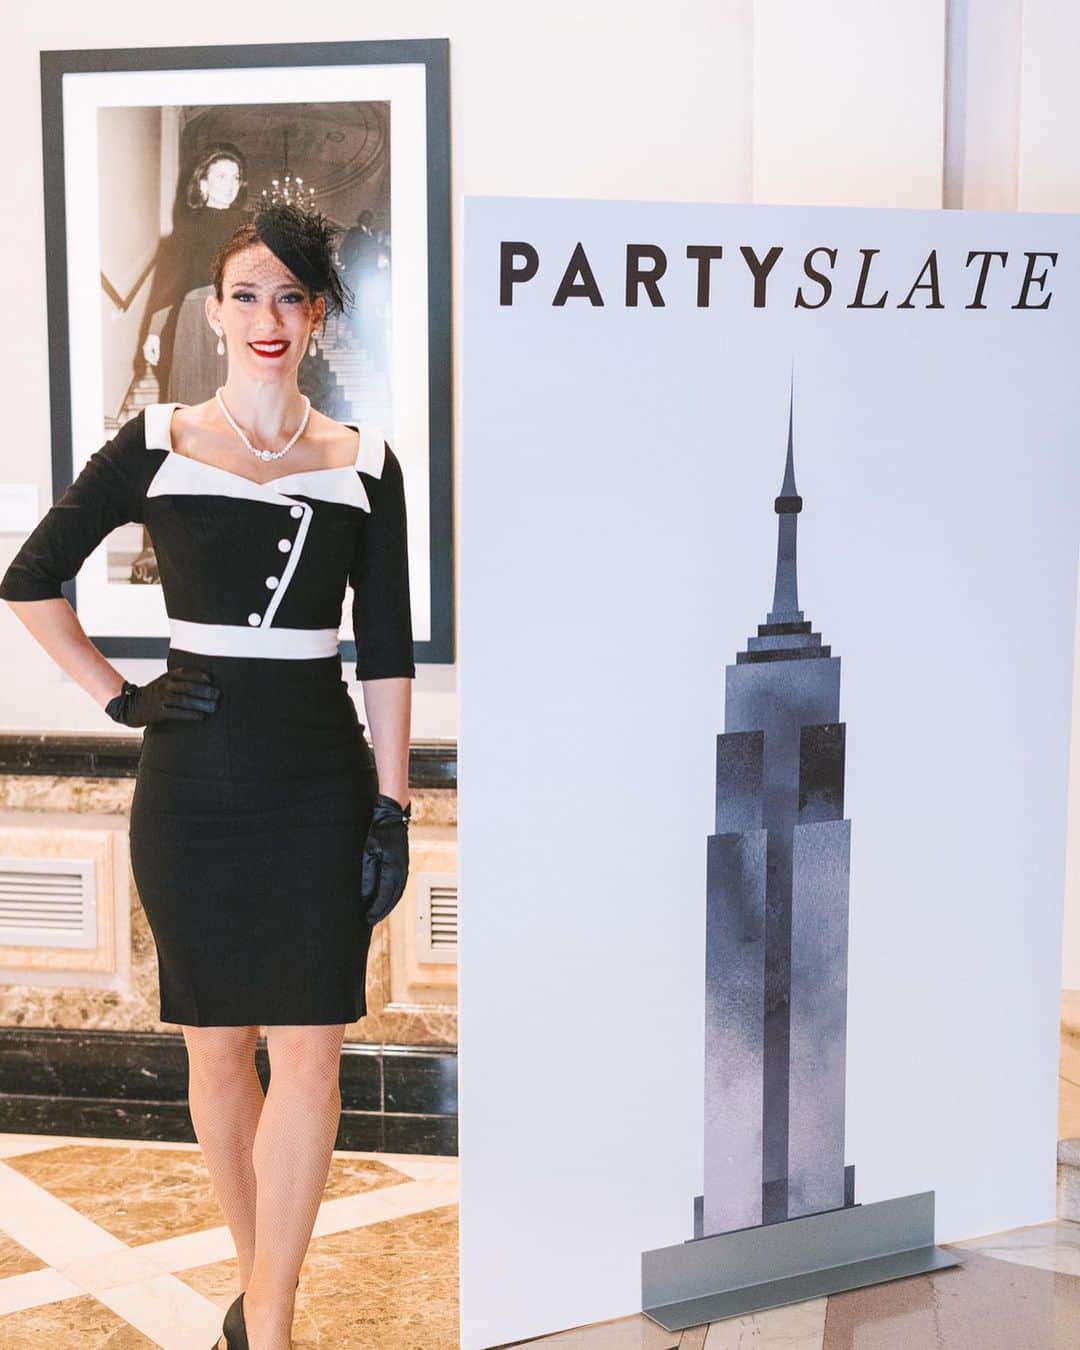 Ceci Johnsonさんのインスタグラム写真 - (Ceci JohnsonInstagram)「CORPORATE | There is no detail too small when it comes to branding. Review our couture graphic design and e-invite creations for THE PARTY by @partyslate inspired by the glorious fall season in NYC! 🗽🎉🍁 #CeciCouture  Contact us at hello@cecinewyork.com to make your event branding unforgettable!   CREATIVE PARTNERS Invitation, Event Branding + Signage: @cecinewyork Planning + Creative Design: @properfunevents @jesgordon Venue: @halldeslumieres  Entertainment: @jordankahnorchestra Catering: @rhchospitality Furniture: @rentquest_nyc Photography: @afrikarmando Videography: @kennethcooperfilms Signage + Printing: @bombshellgraphics Catering Rentals: @partyrentalltd Custom Scent: @scenting_events Custom Tote Bags: @hnrcrew Takeaway Cookies: @vincenzo_salvatore_cakes  #cecinewyork #partyslate #partygraphicdesign #partystationery #nycparty」11月3日 22時32分 - cecinewyork